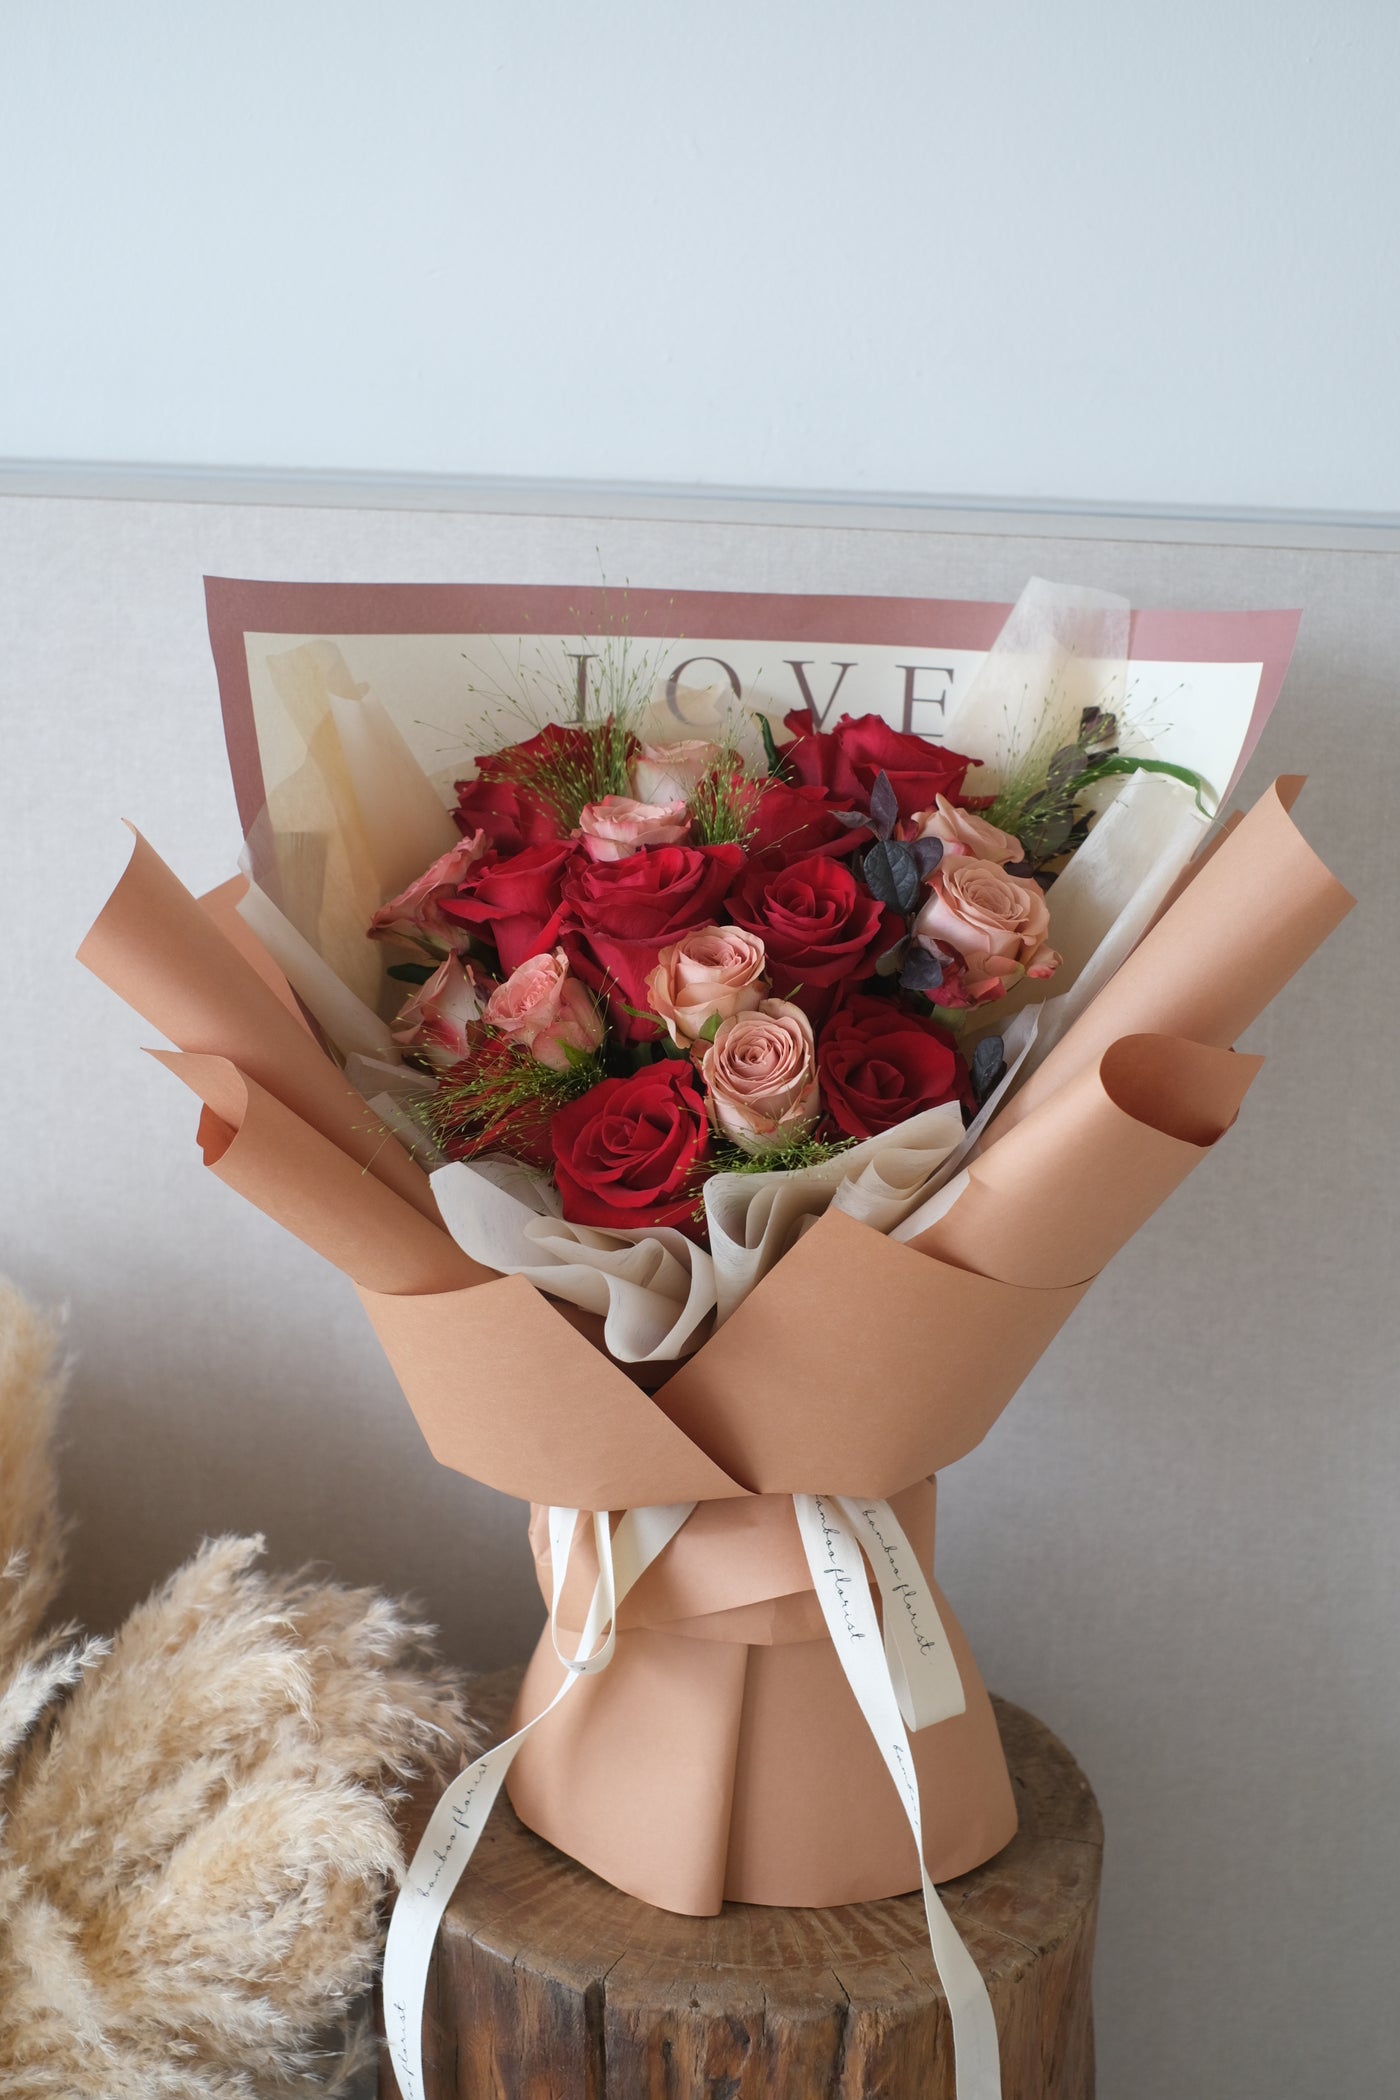 flower arrangements ideas for proposal with flowers, dedicated to show your love with a bouquet of rose - 18 roses